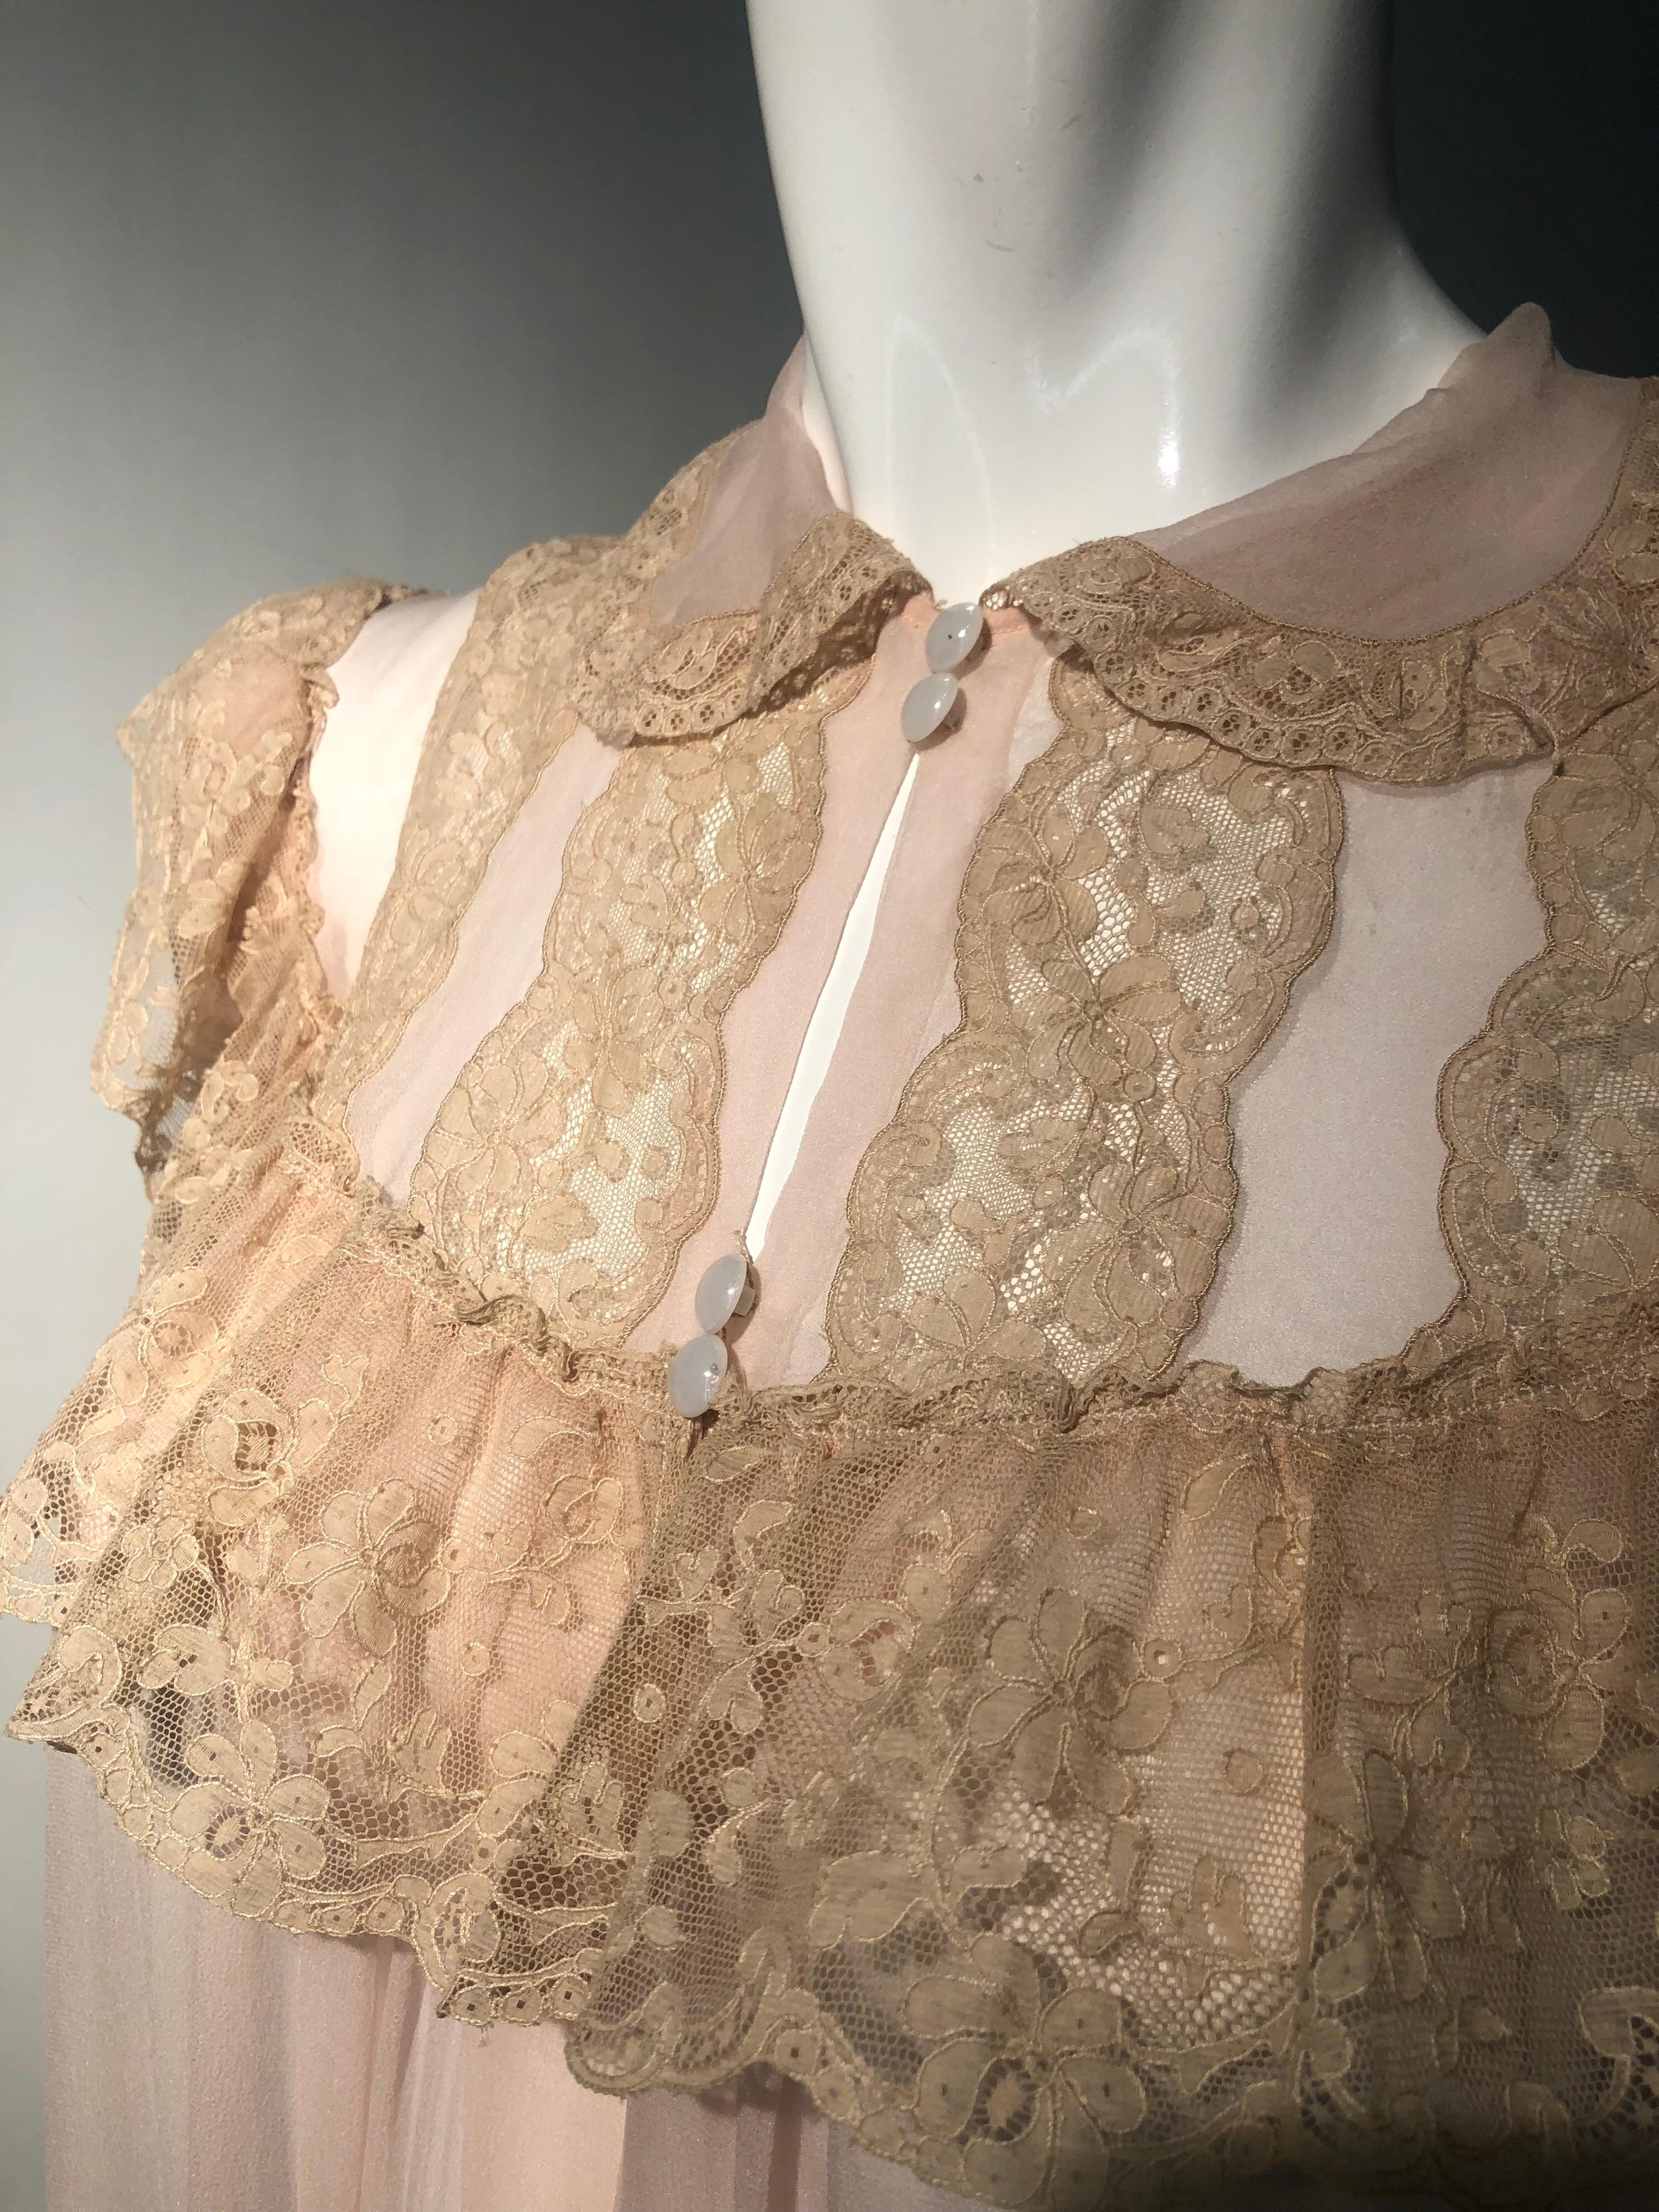 1930 Pale Pink Silk Chiffon Peignoir with Ecru Lace Decolletage  In Excellent Condition For Sale In Gresham, OR